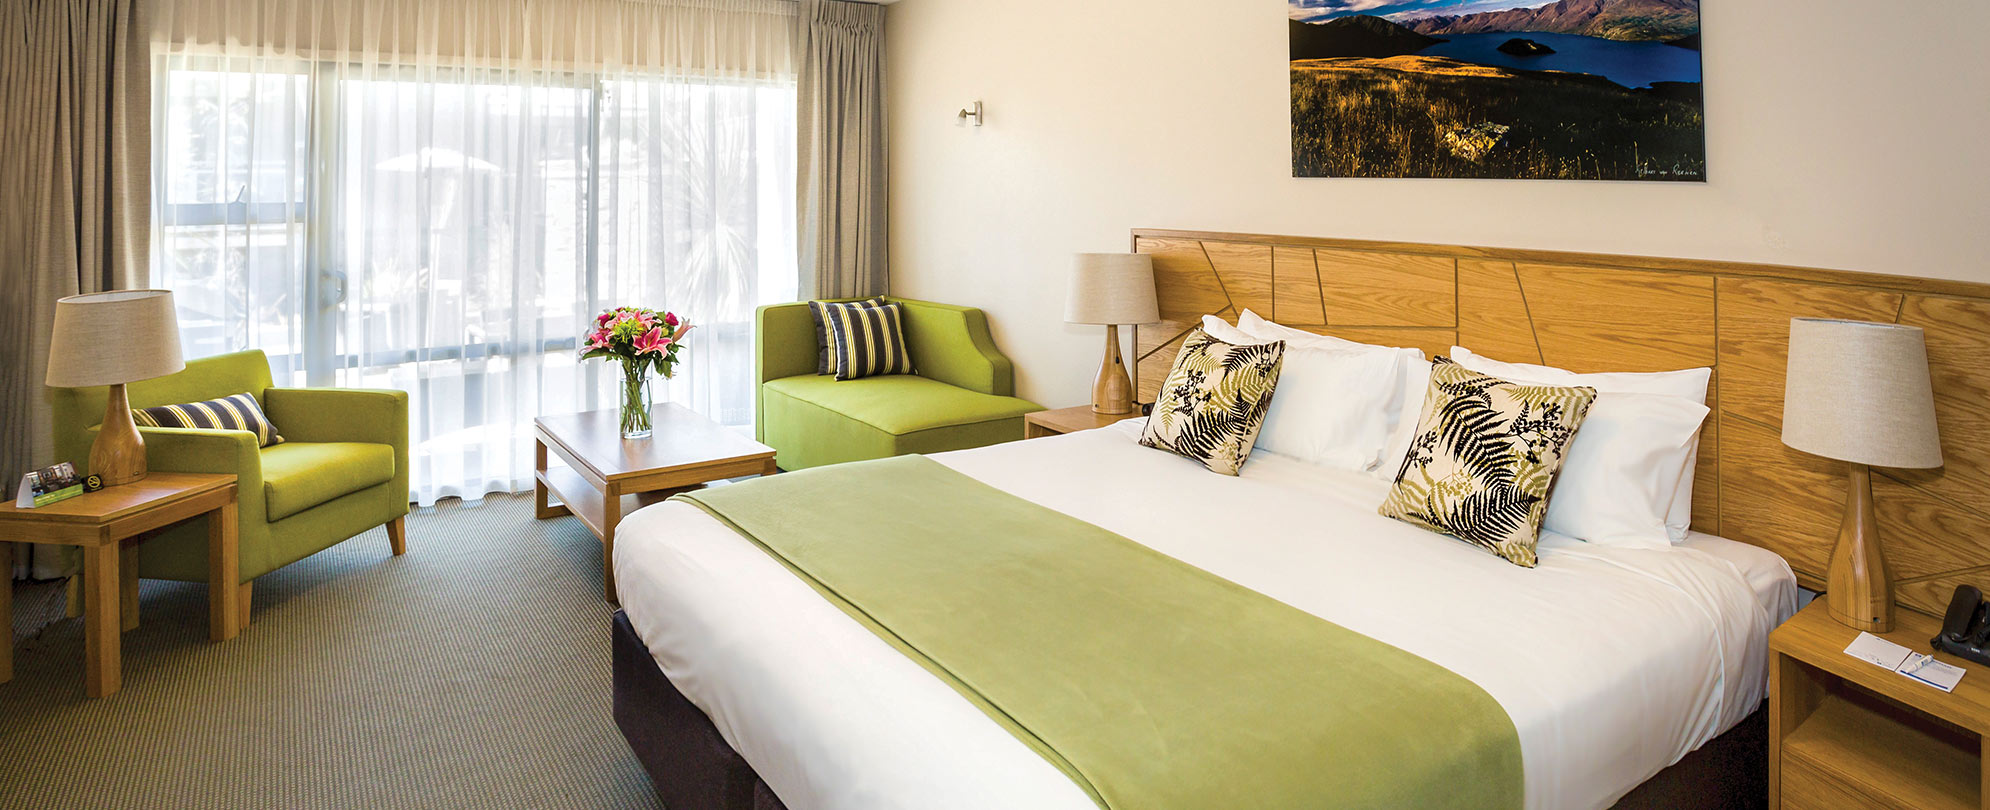 A king-sized bed in the bedroom of the standard suite at Club Wyndham Wanaka.